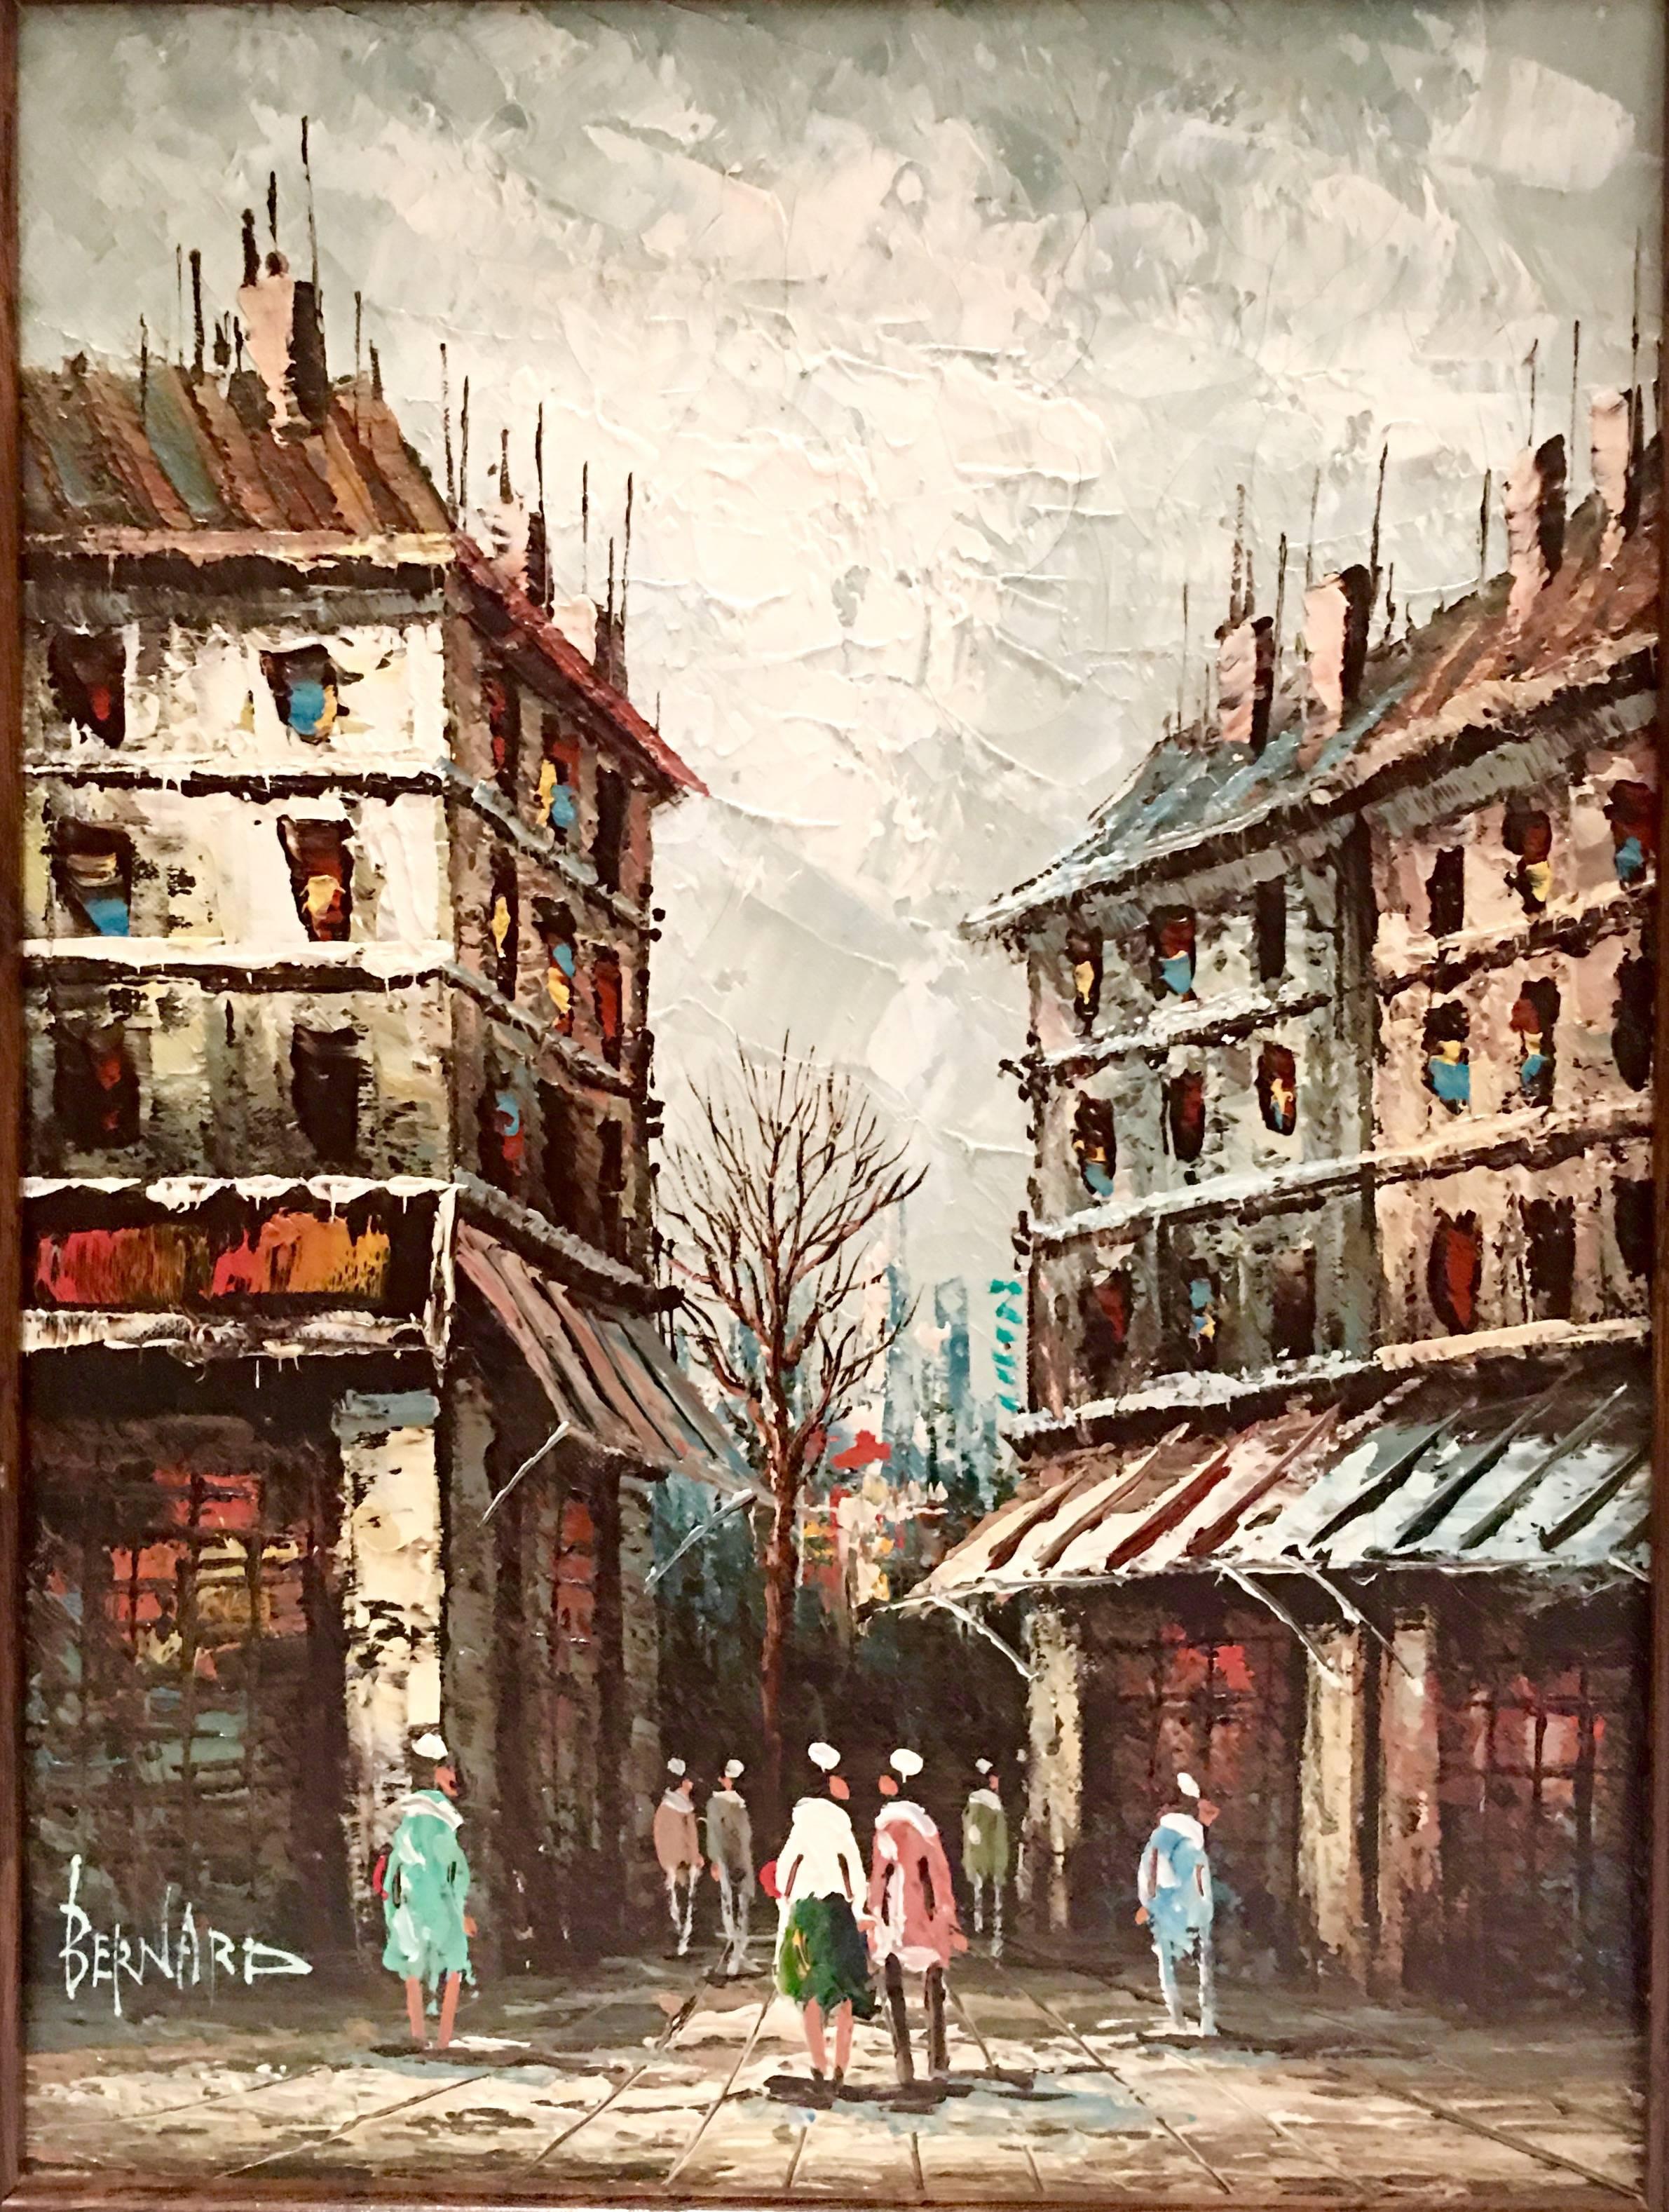 Impressionist oil on canvas Paris street scene original oil painting on canvas signed, Bernard lower left. Great texture and movement wet look details. Original wood frame with a high gloss finish. Image size, 16